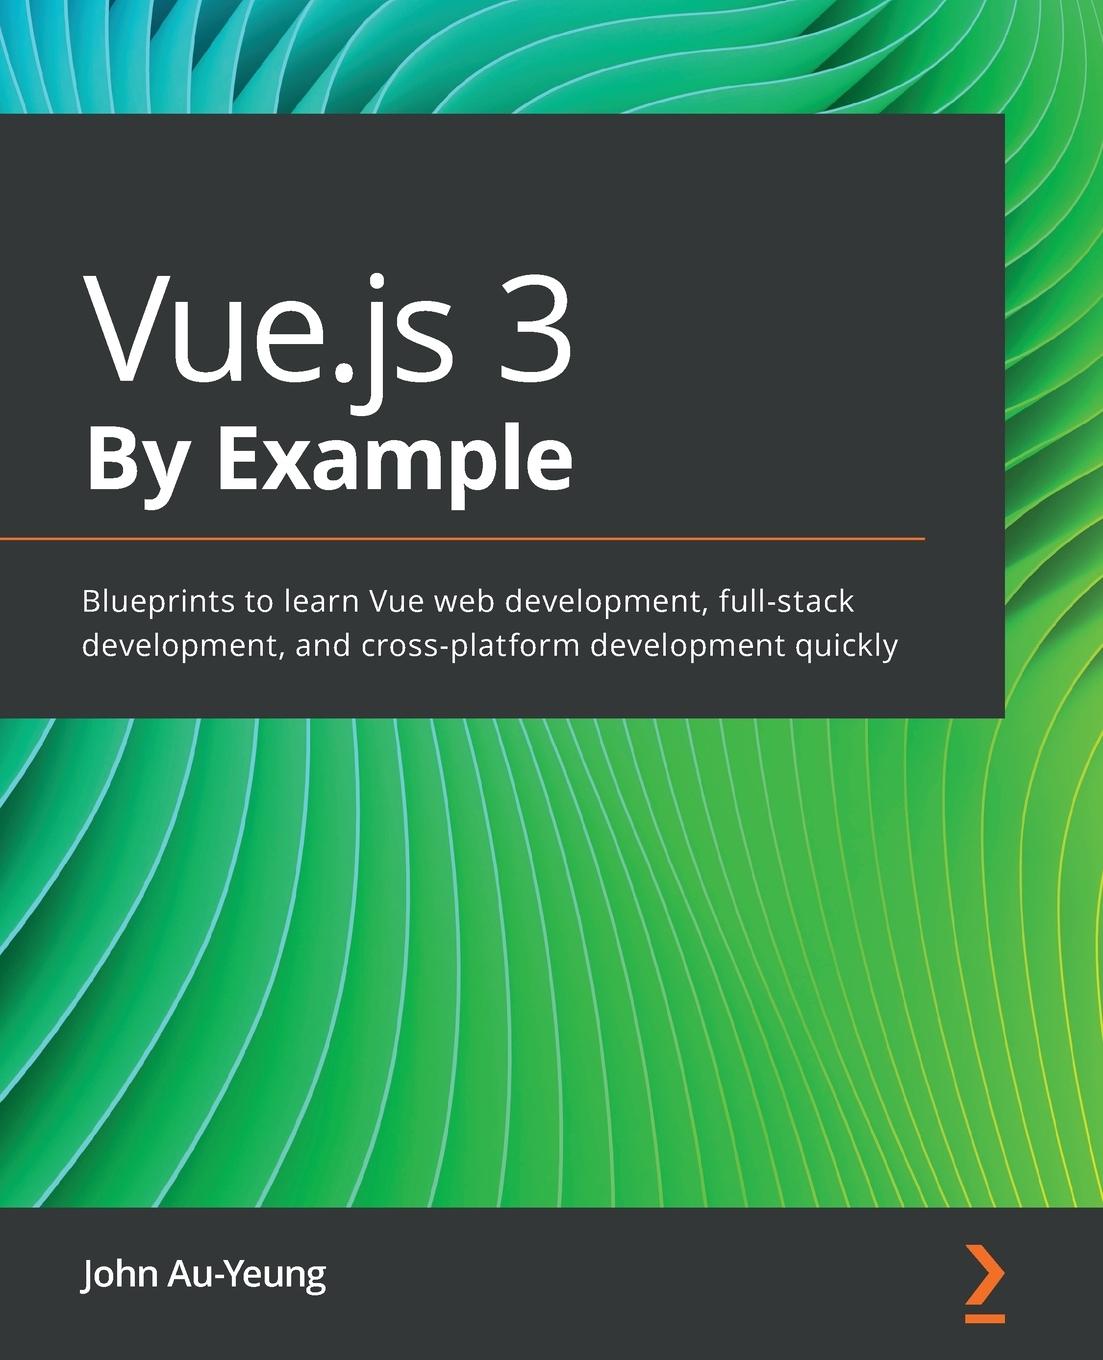 Book Vue.js 3 By Example 